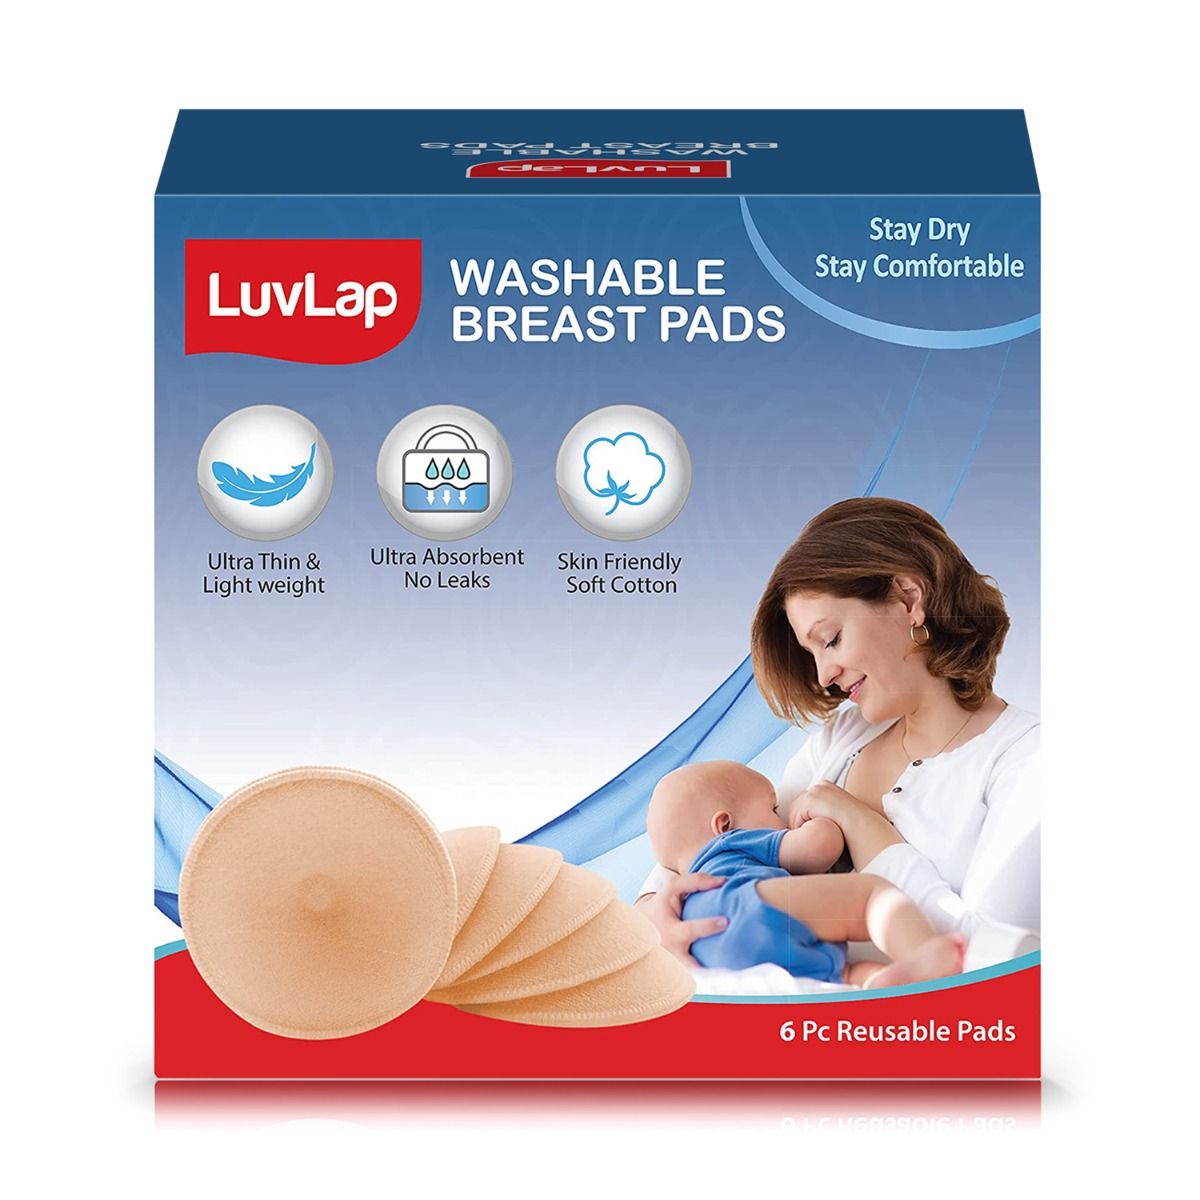 Buy Washable Breast Pads, 6 pcs Online at Best Price – Luvlap Store